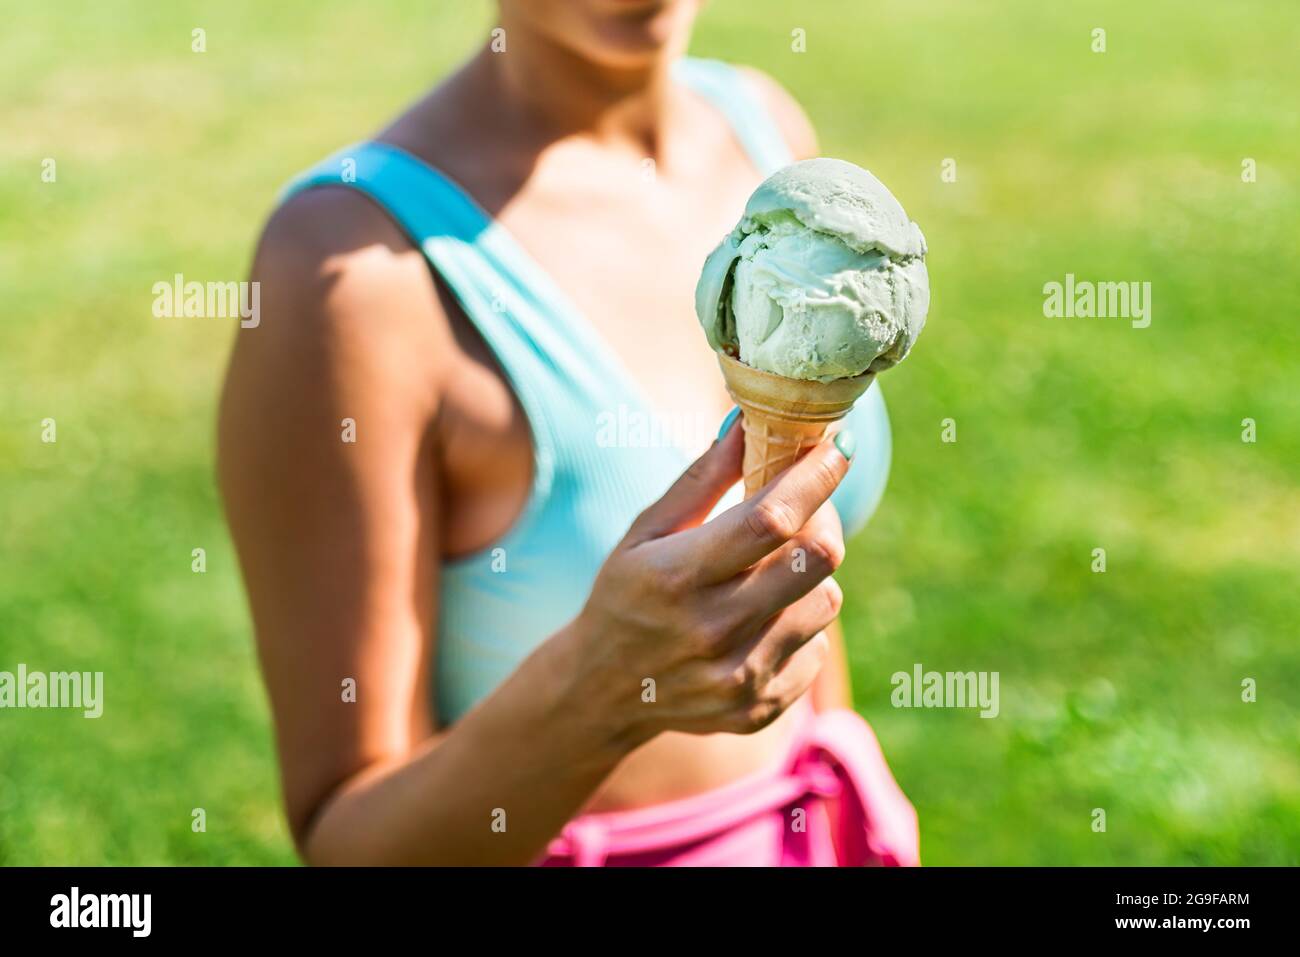 Ice cream cone in hand of a fit woman in summer. Gelato and colorful fashion in park. Retro vibes in outfit and icecream on sunny weekend. Stock Photo